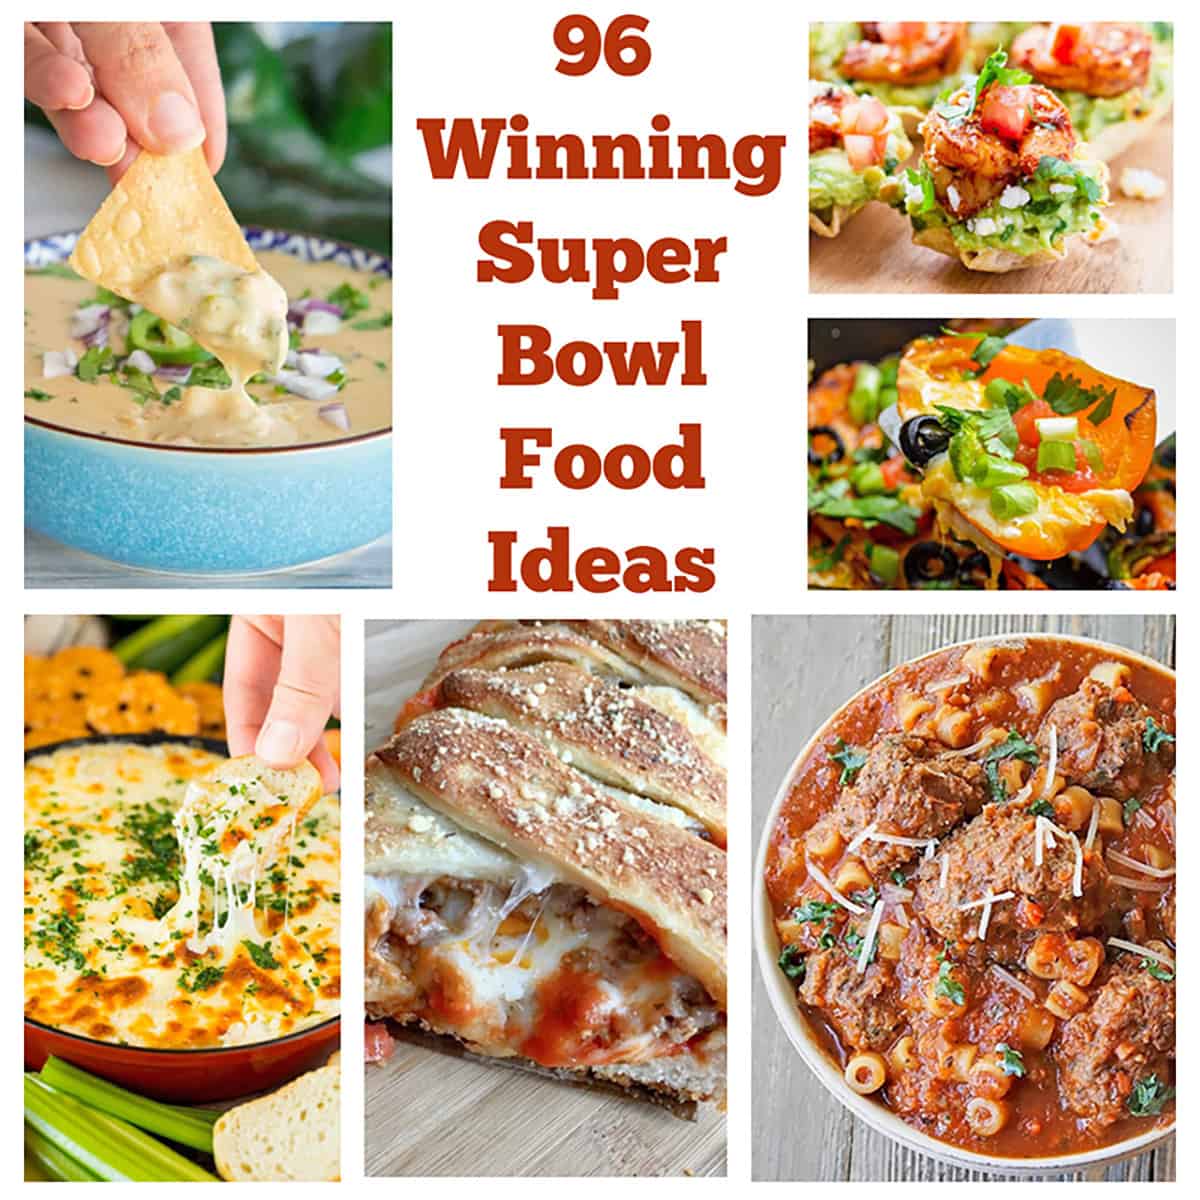 Super Bowl Roundup Food Collage with jalapeno poopers, queso dip, artichoke dip, pizza bread, meatball stew, bell pepper nachos, shili lime shrimp cups and cheeseball in the shape of a football